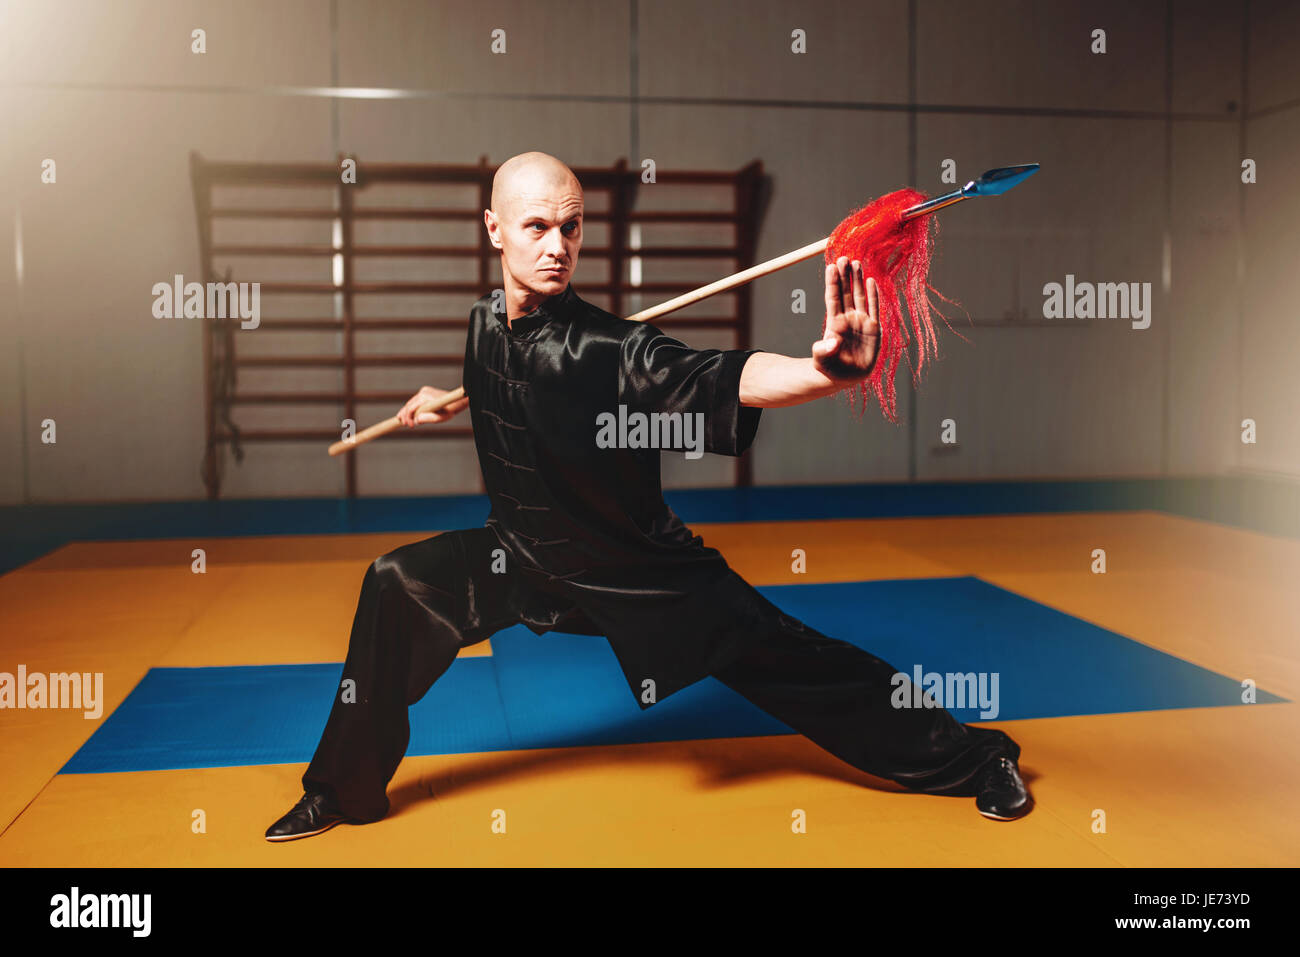 Wushu master training with spear, martial arts. Man in black cloth poses with blade Stock Photo